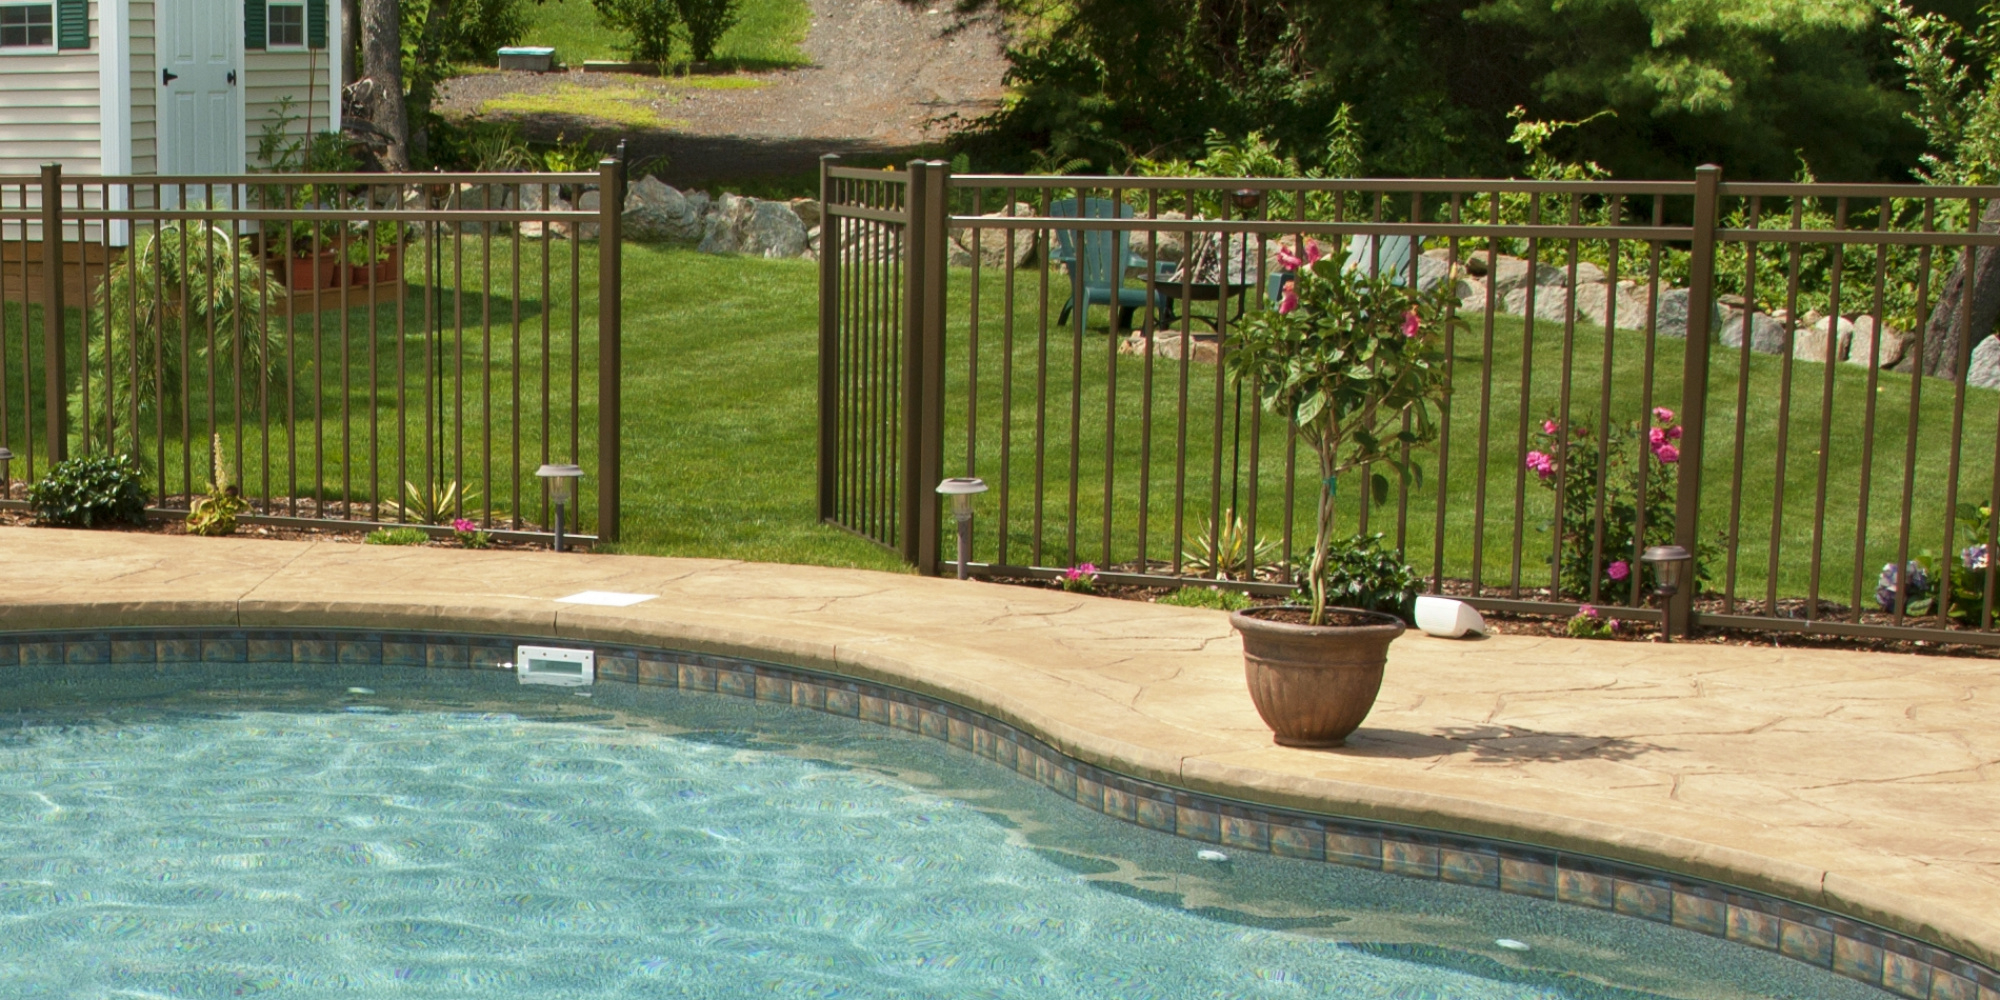 267_poolbannerpic Your local Fence Installer in Delaware.